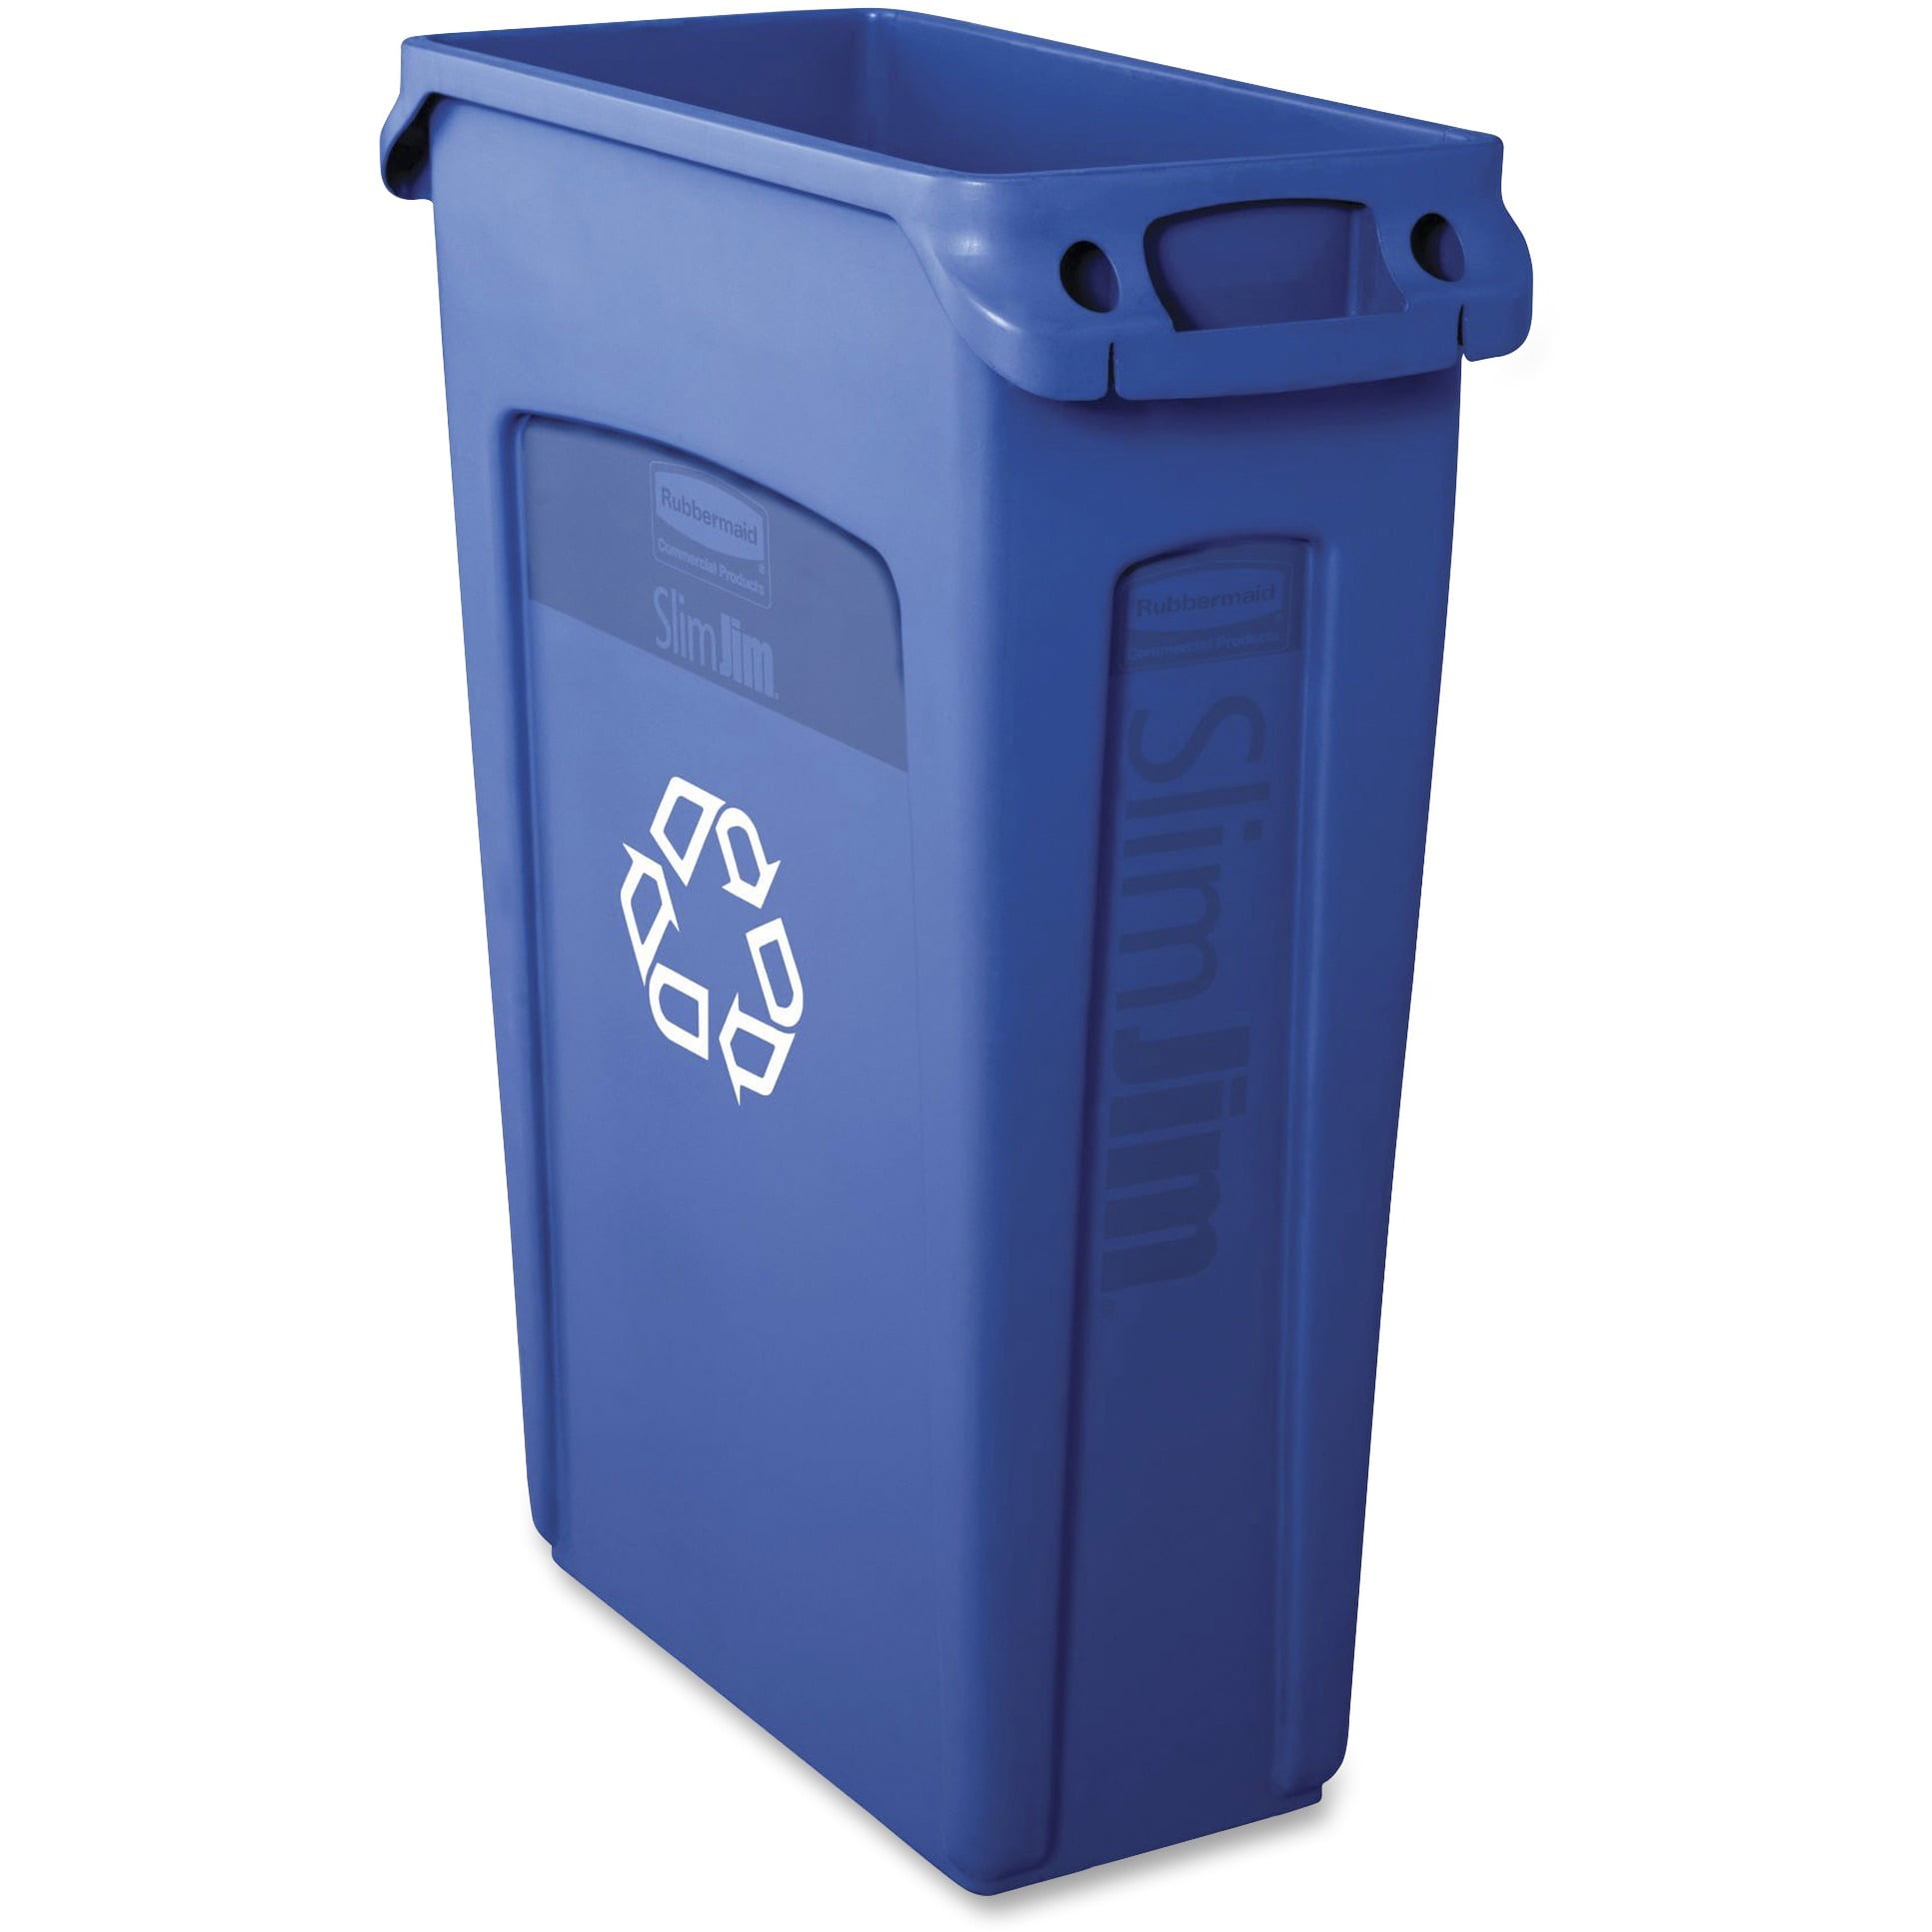 Rubbermaid Commercial Products Slim Jim Plastic Rectangular Recycling Bin Wit... 